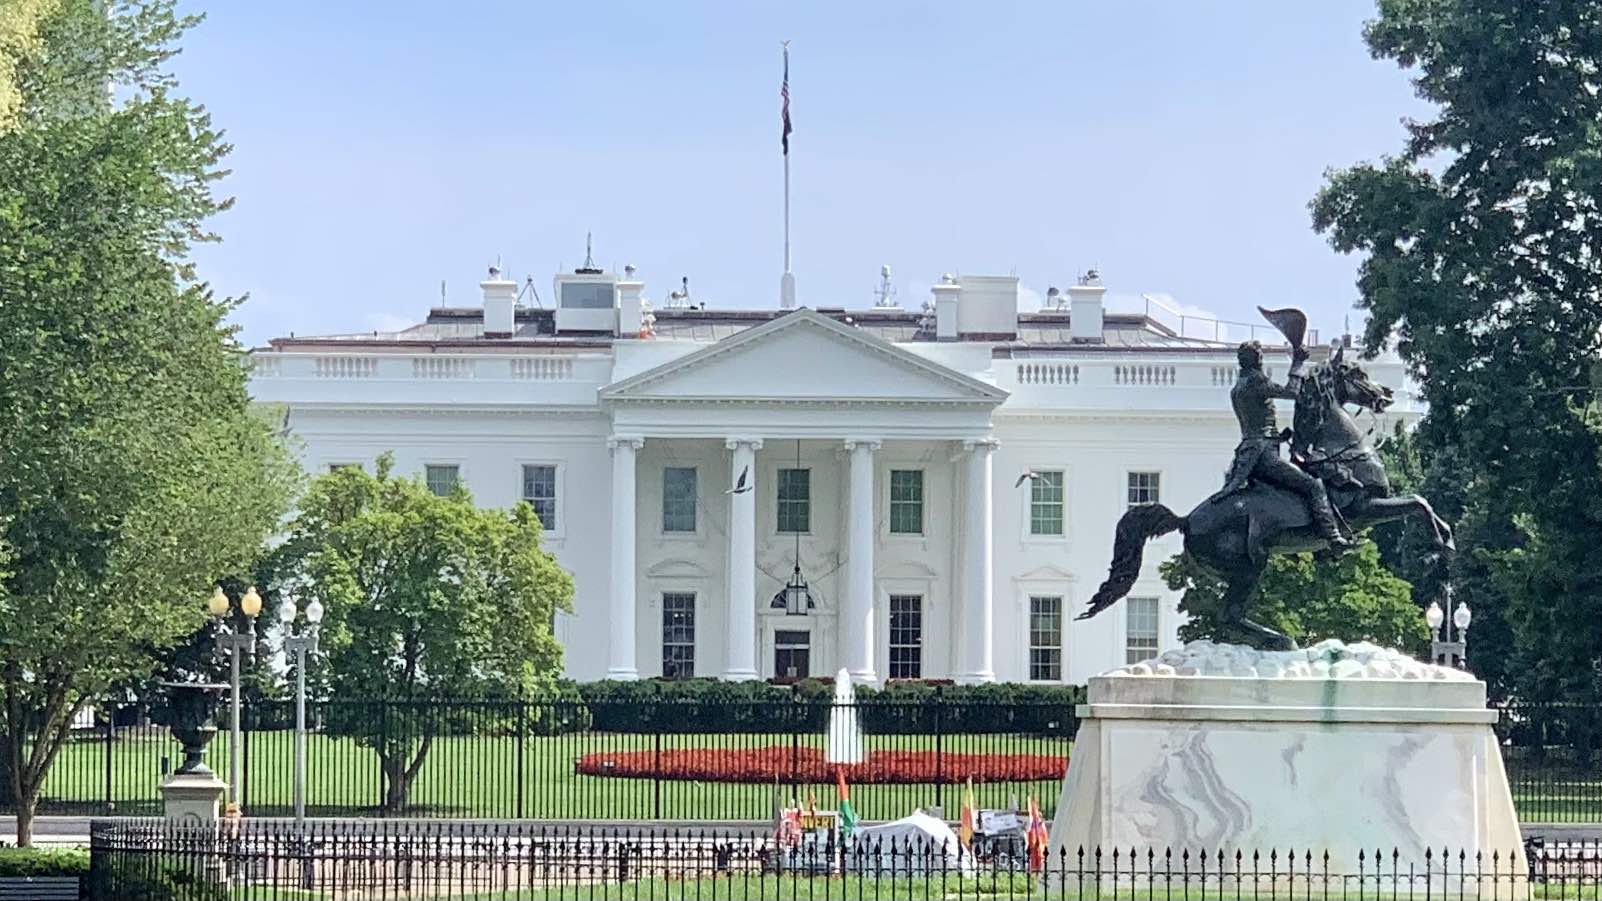 Can't miss the White House!